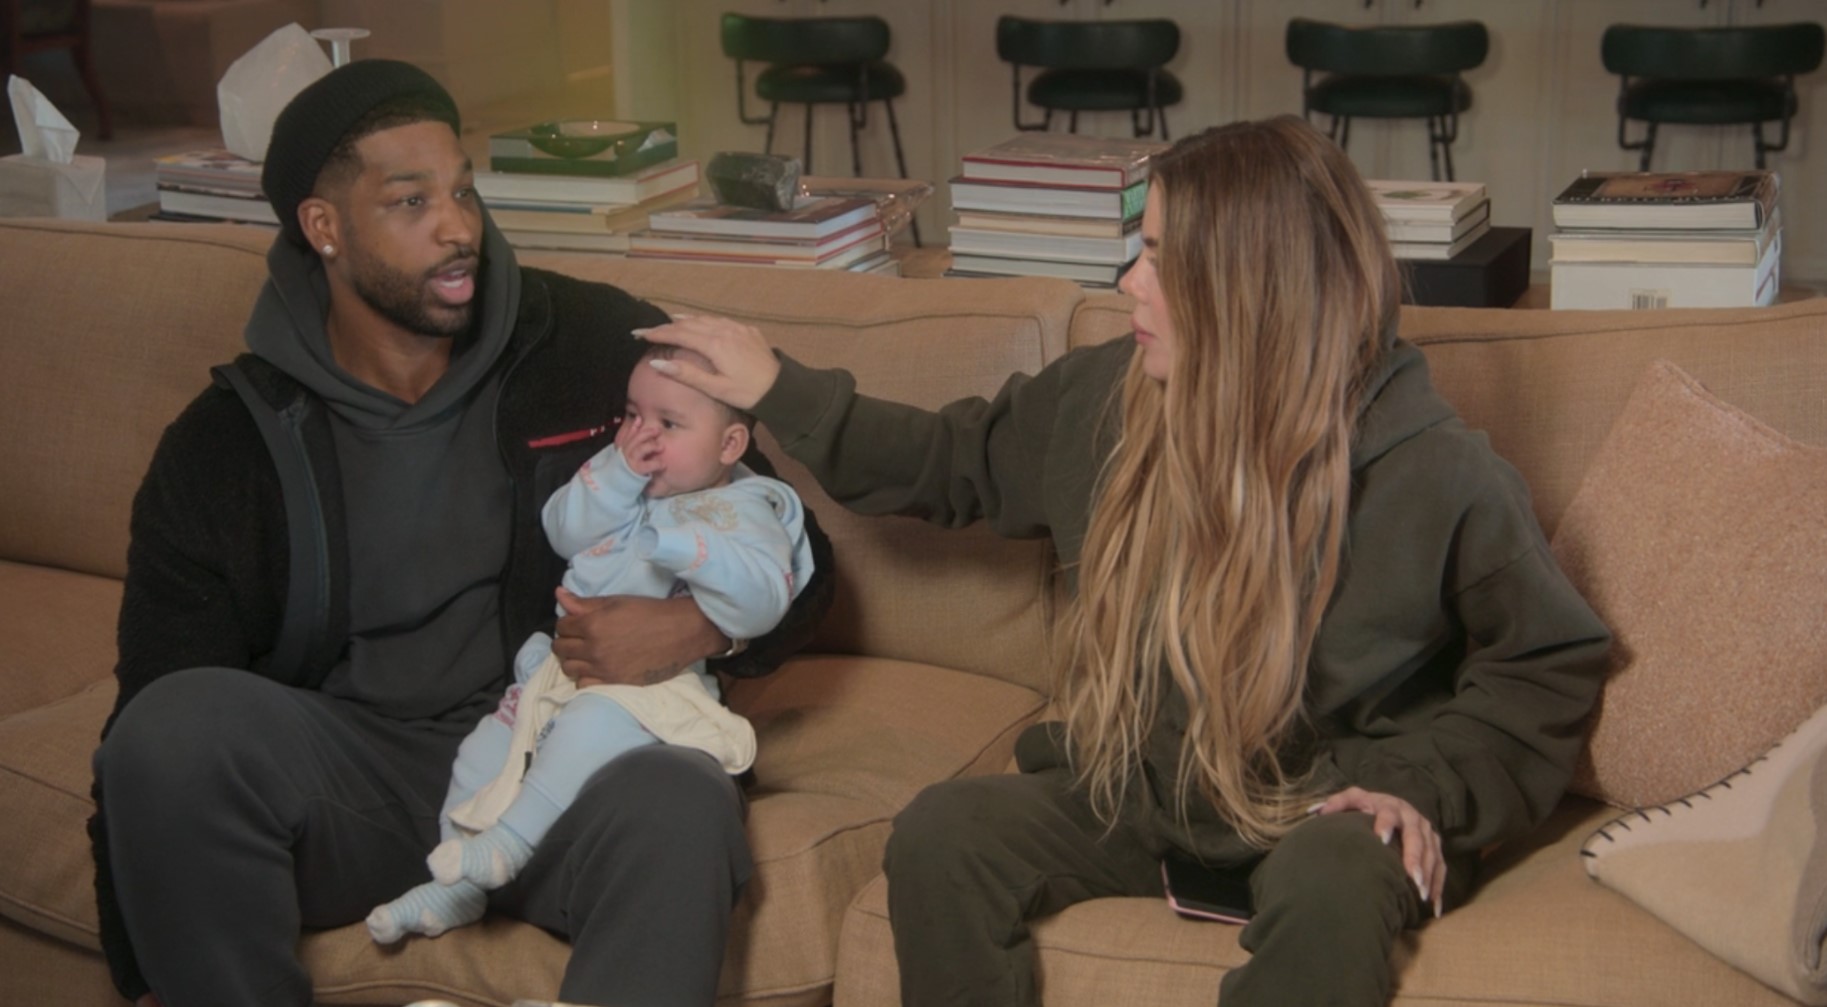 Khloe has stated numerous times that Tristan has run out of chances in getting back together with her